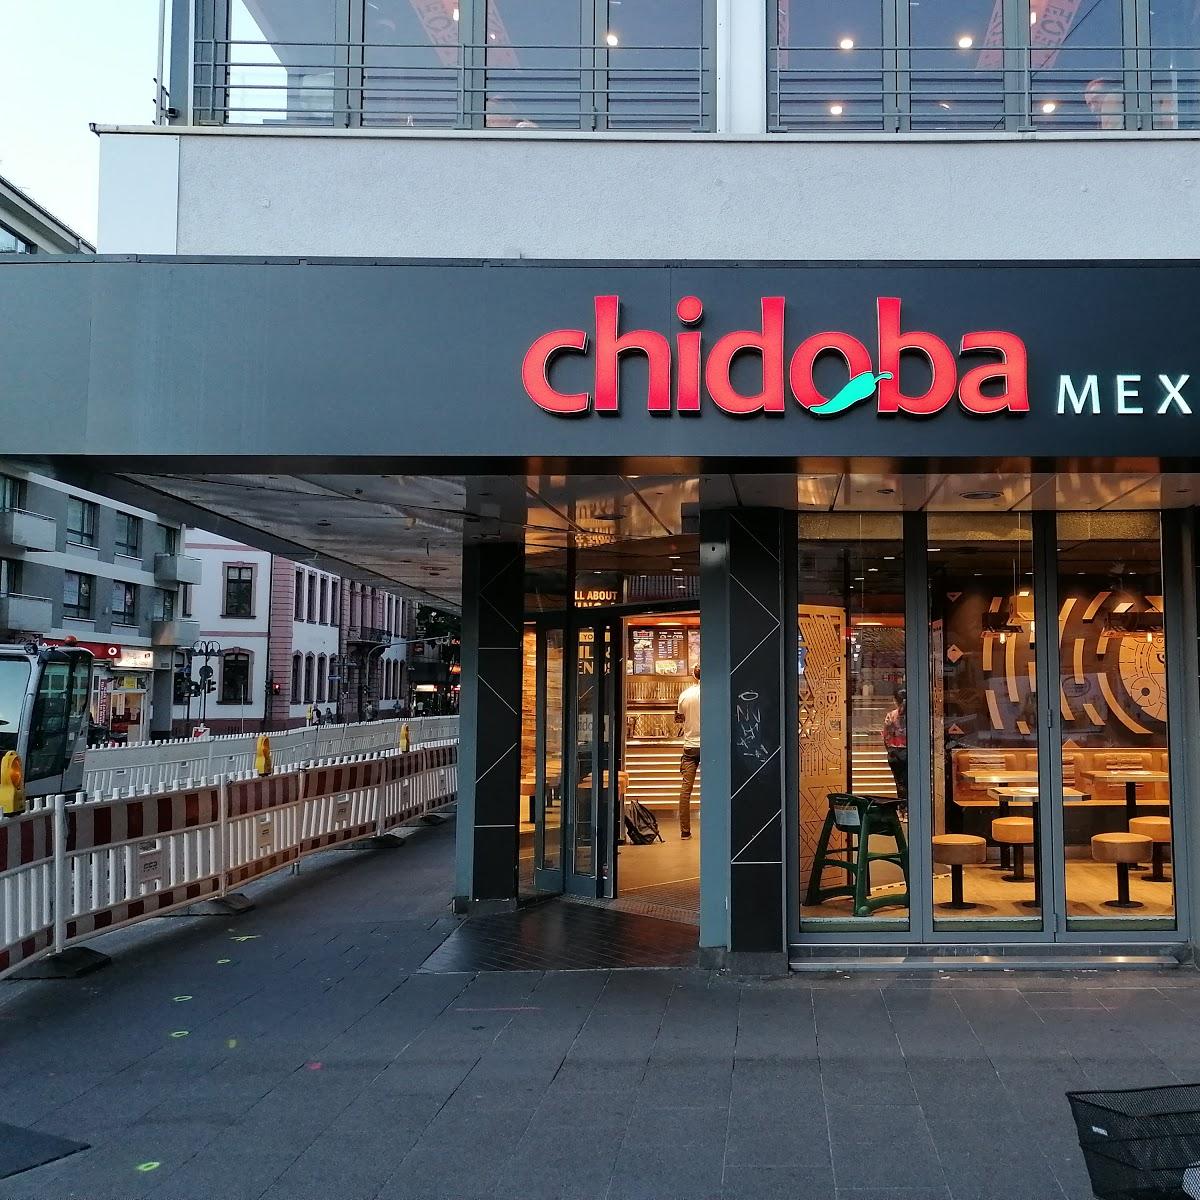 Restaurant "chidoba MEXICAN GRILL" in Mainz